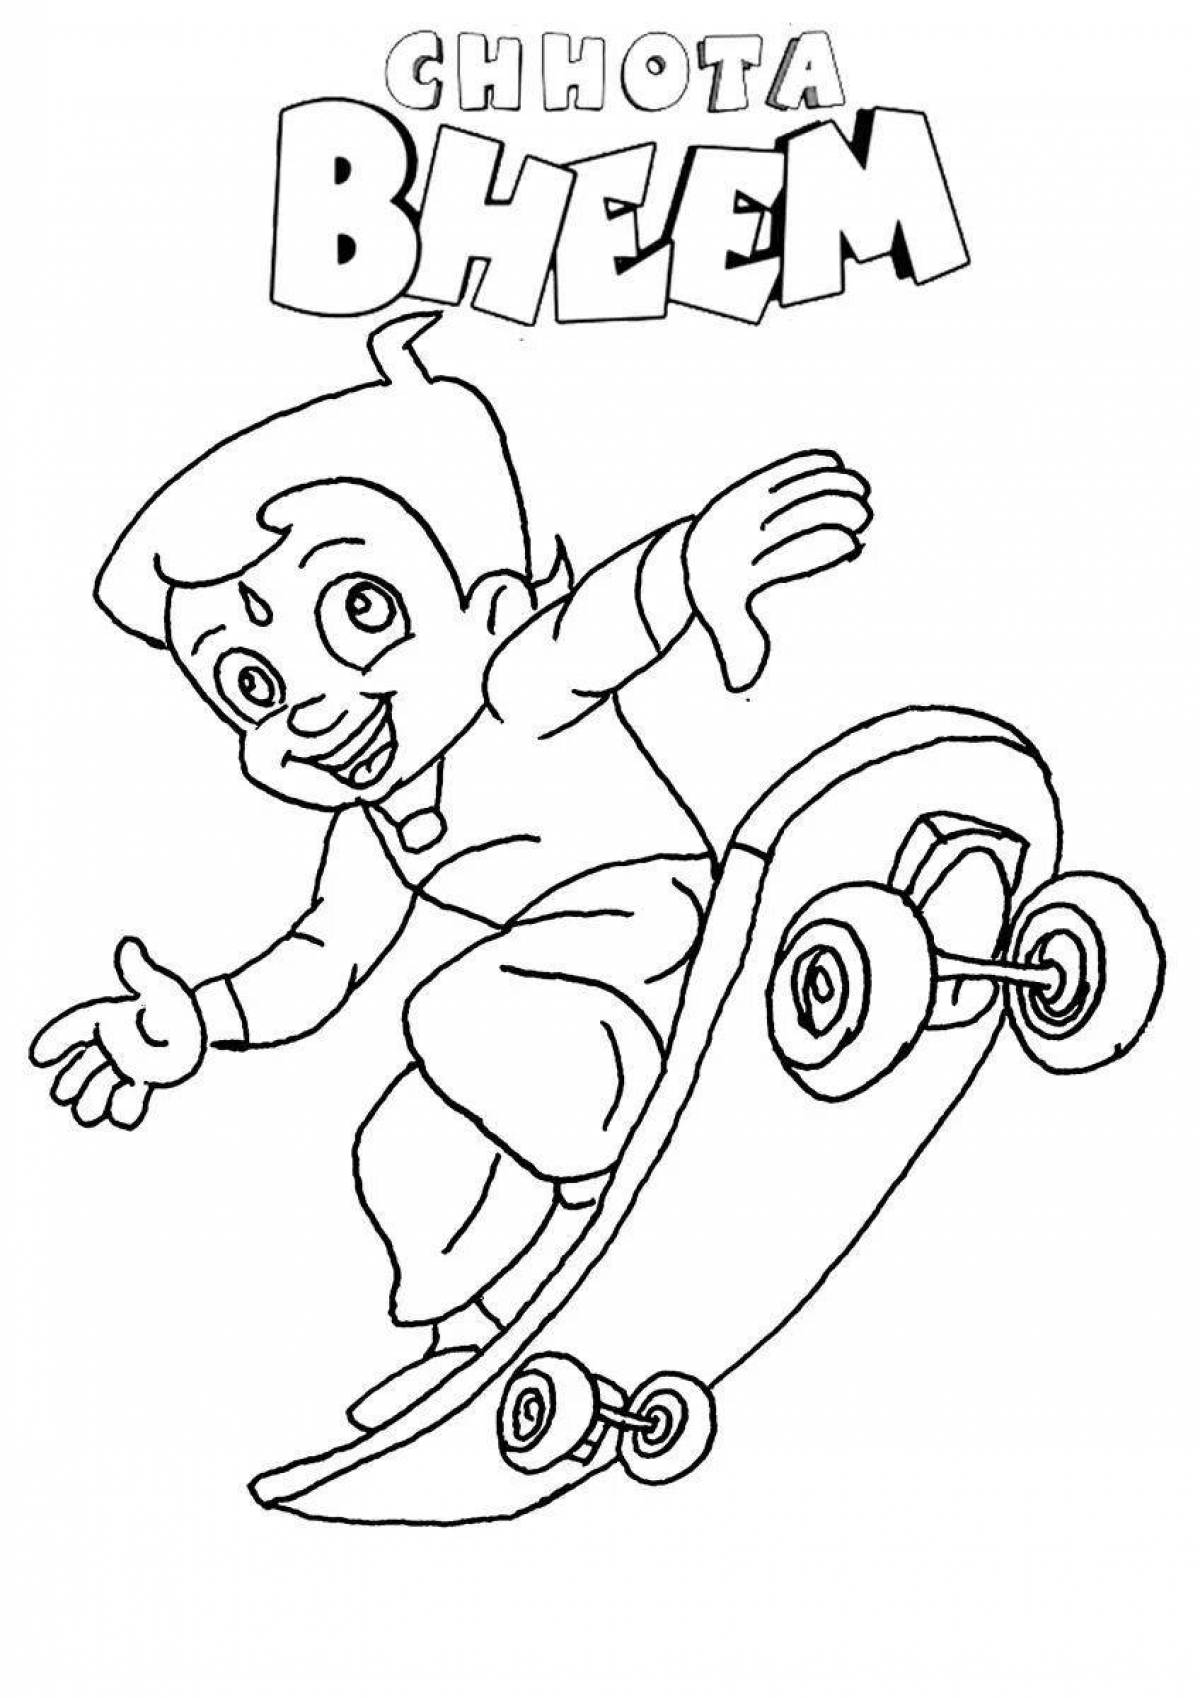 Coloring page energetic skateboarder